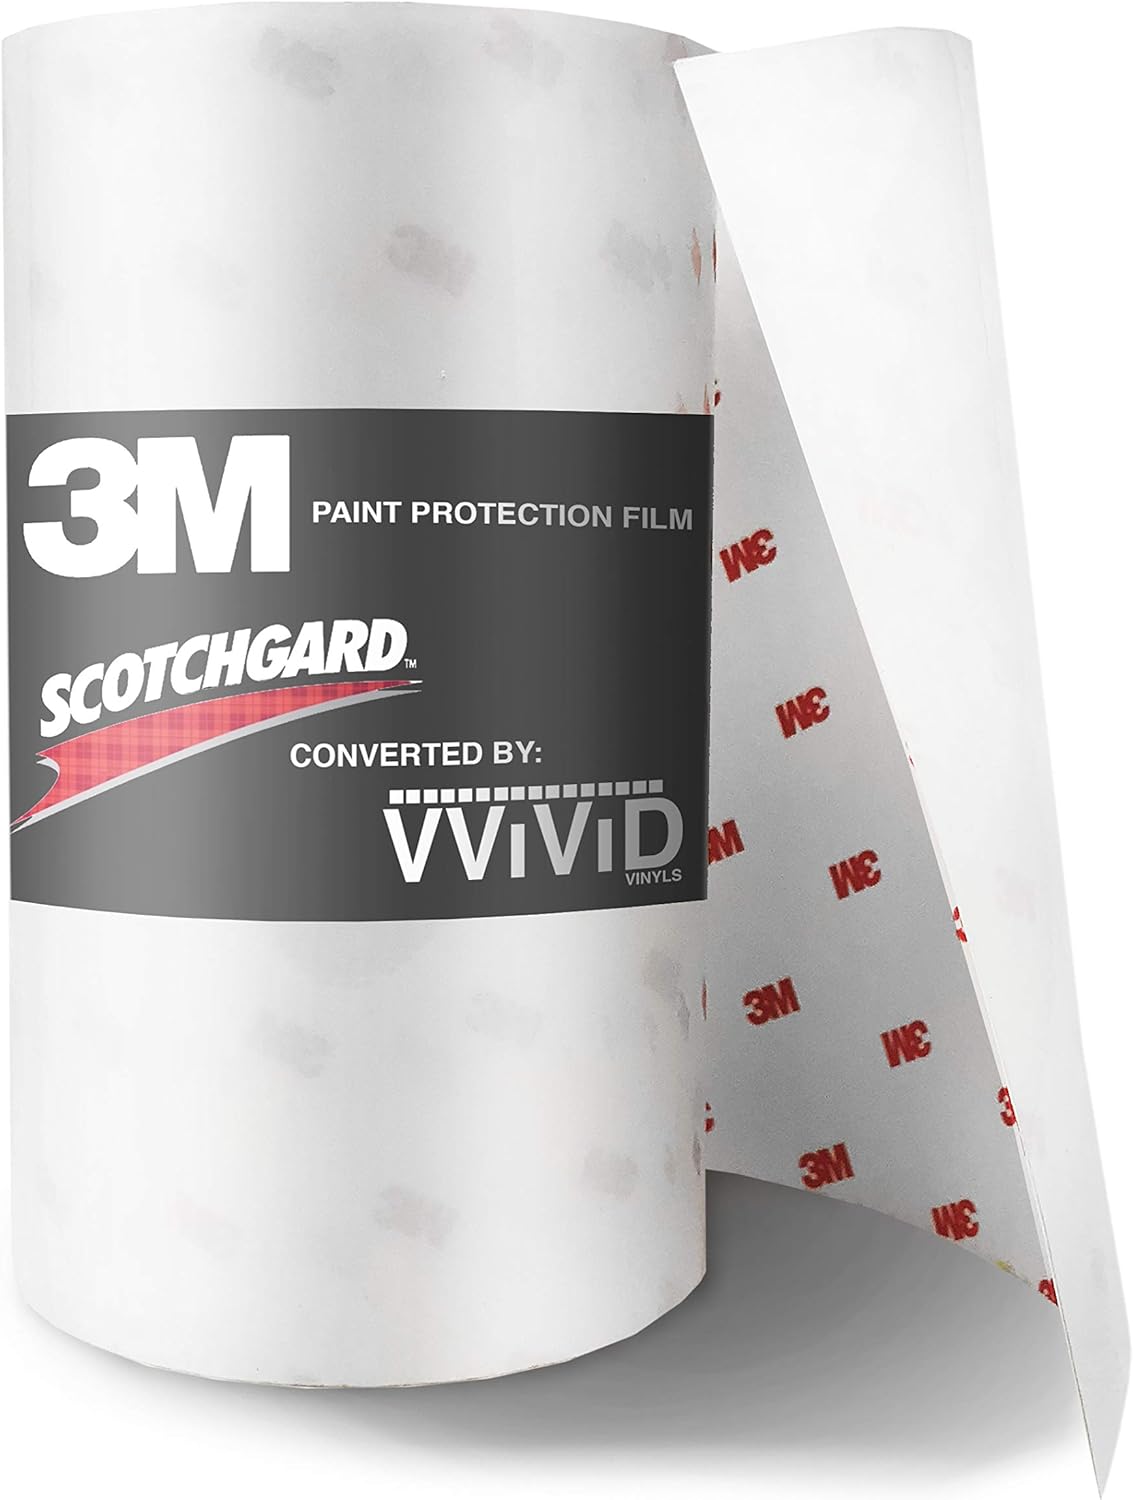 Car Protection Pros 3M Clear Bra Scotchgard Paint Protection Bulk Film Roll 4-by-84-inches